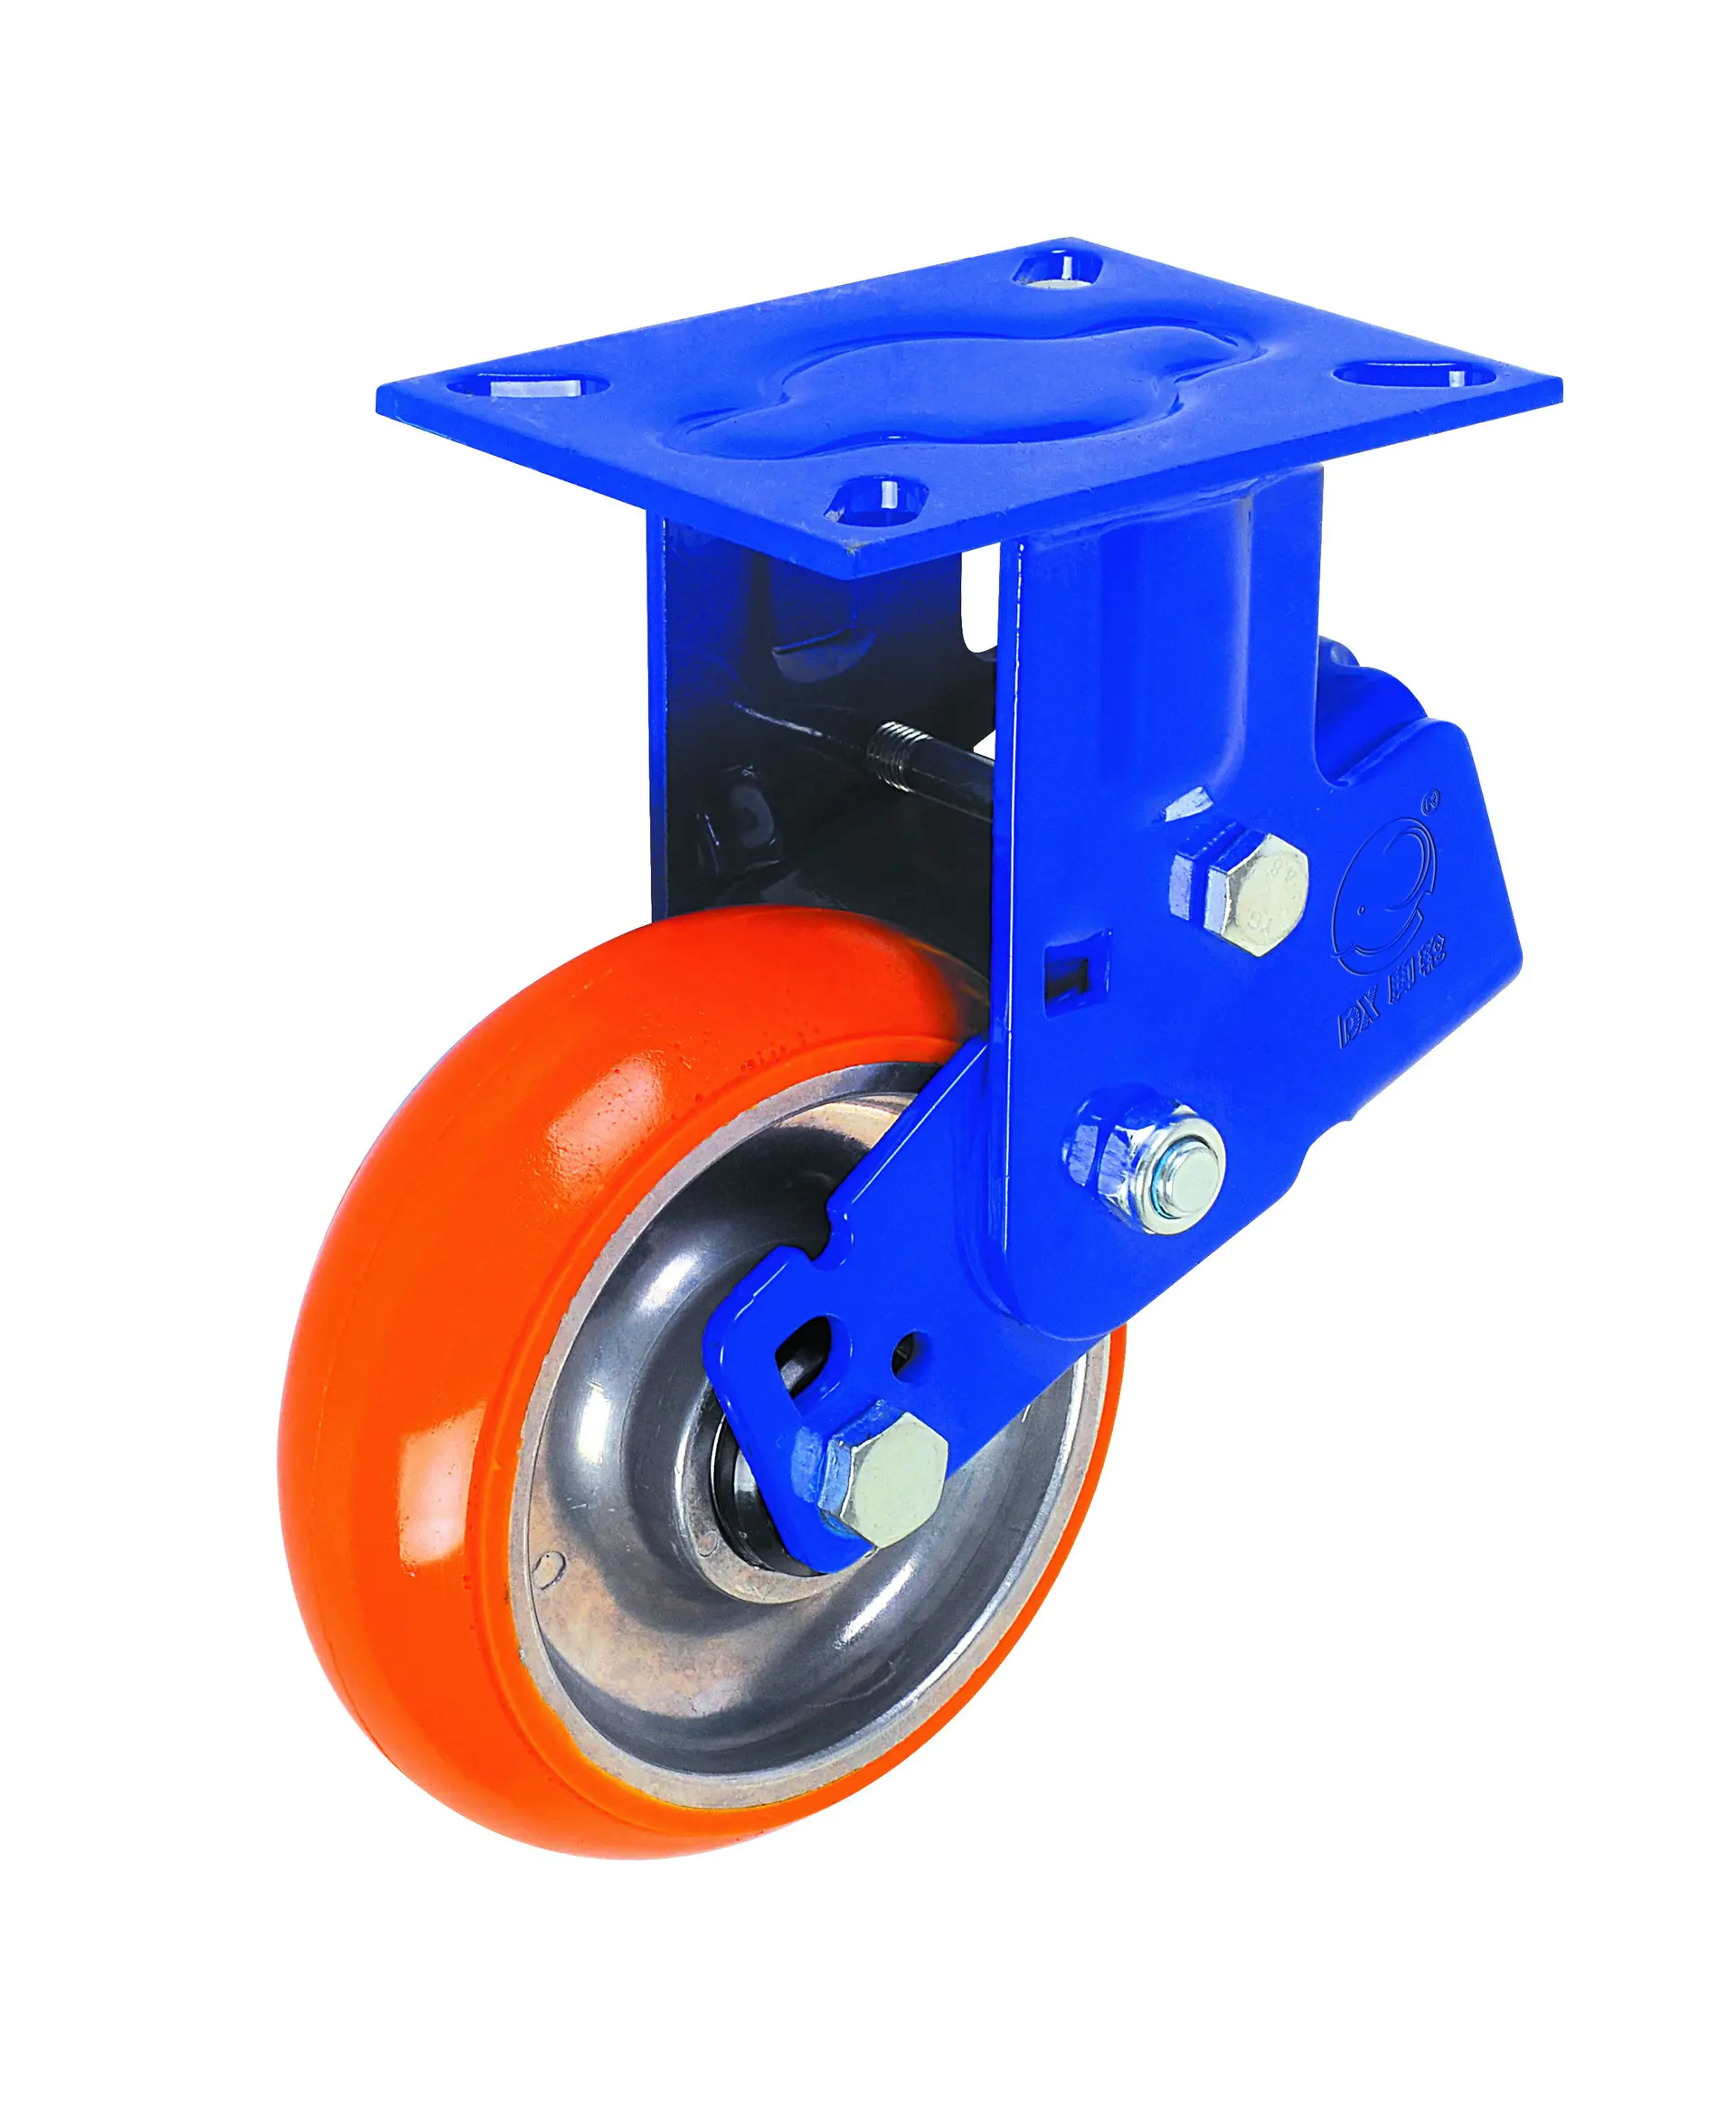 6 Inch Plate Heavy Duty AGV Caster Wheel With Brakes Industrial Shock Absorbing PU Caster